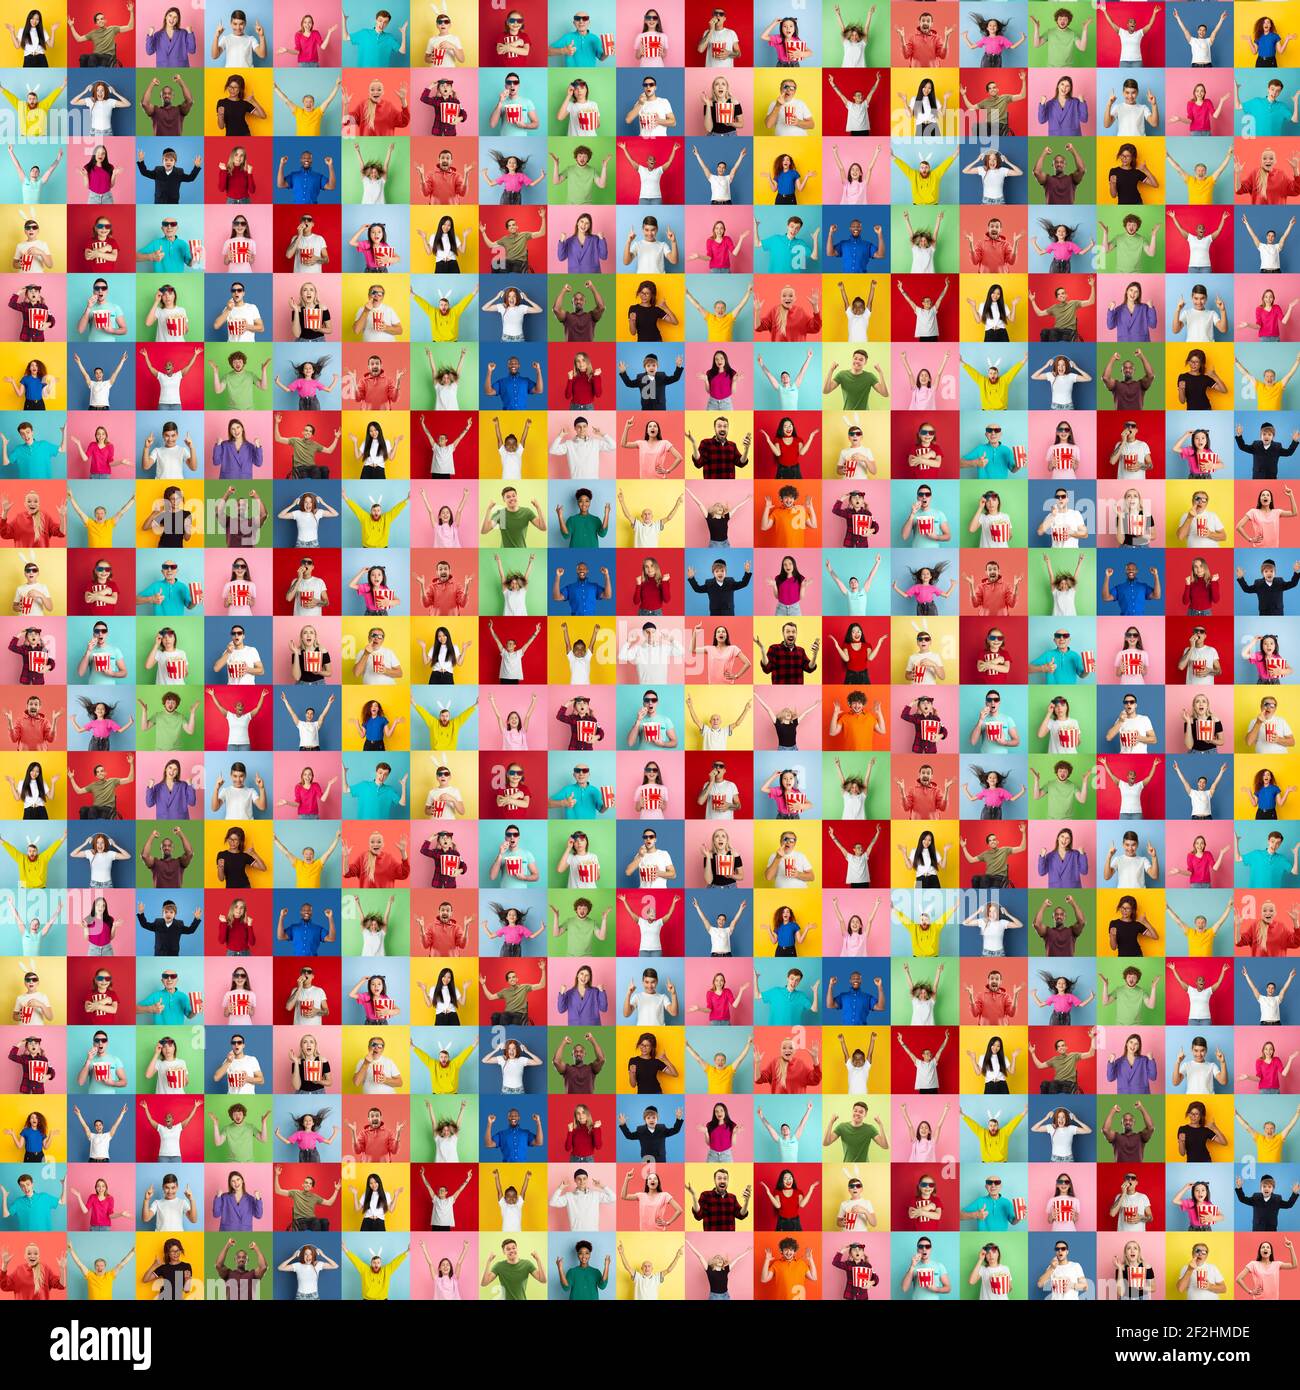 Collage of faces of happy people on multicolored backgrounds. Happy men and women smiling. Human emotions, facial expression concept. Different human facial expressions, emotions, feelings. Stock Photo